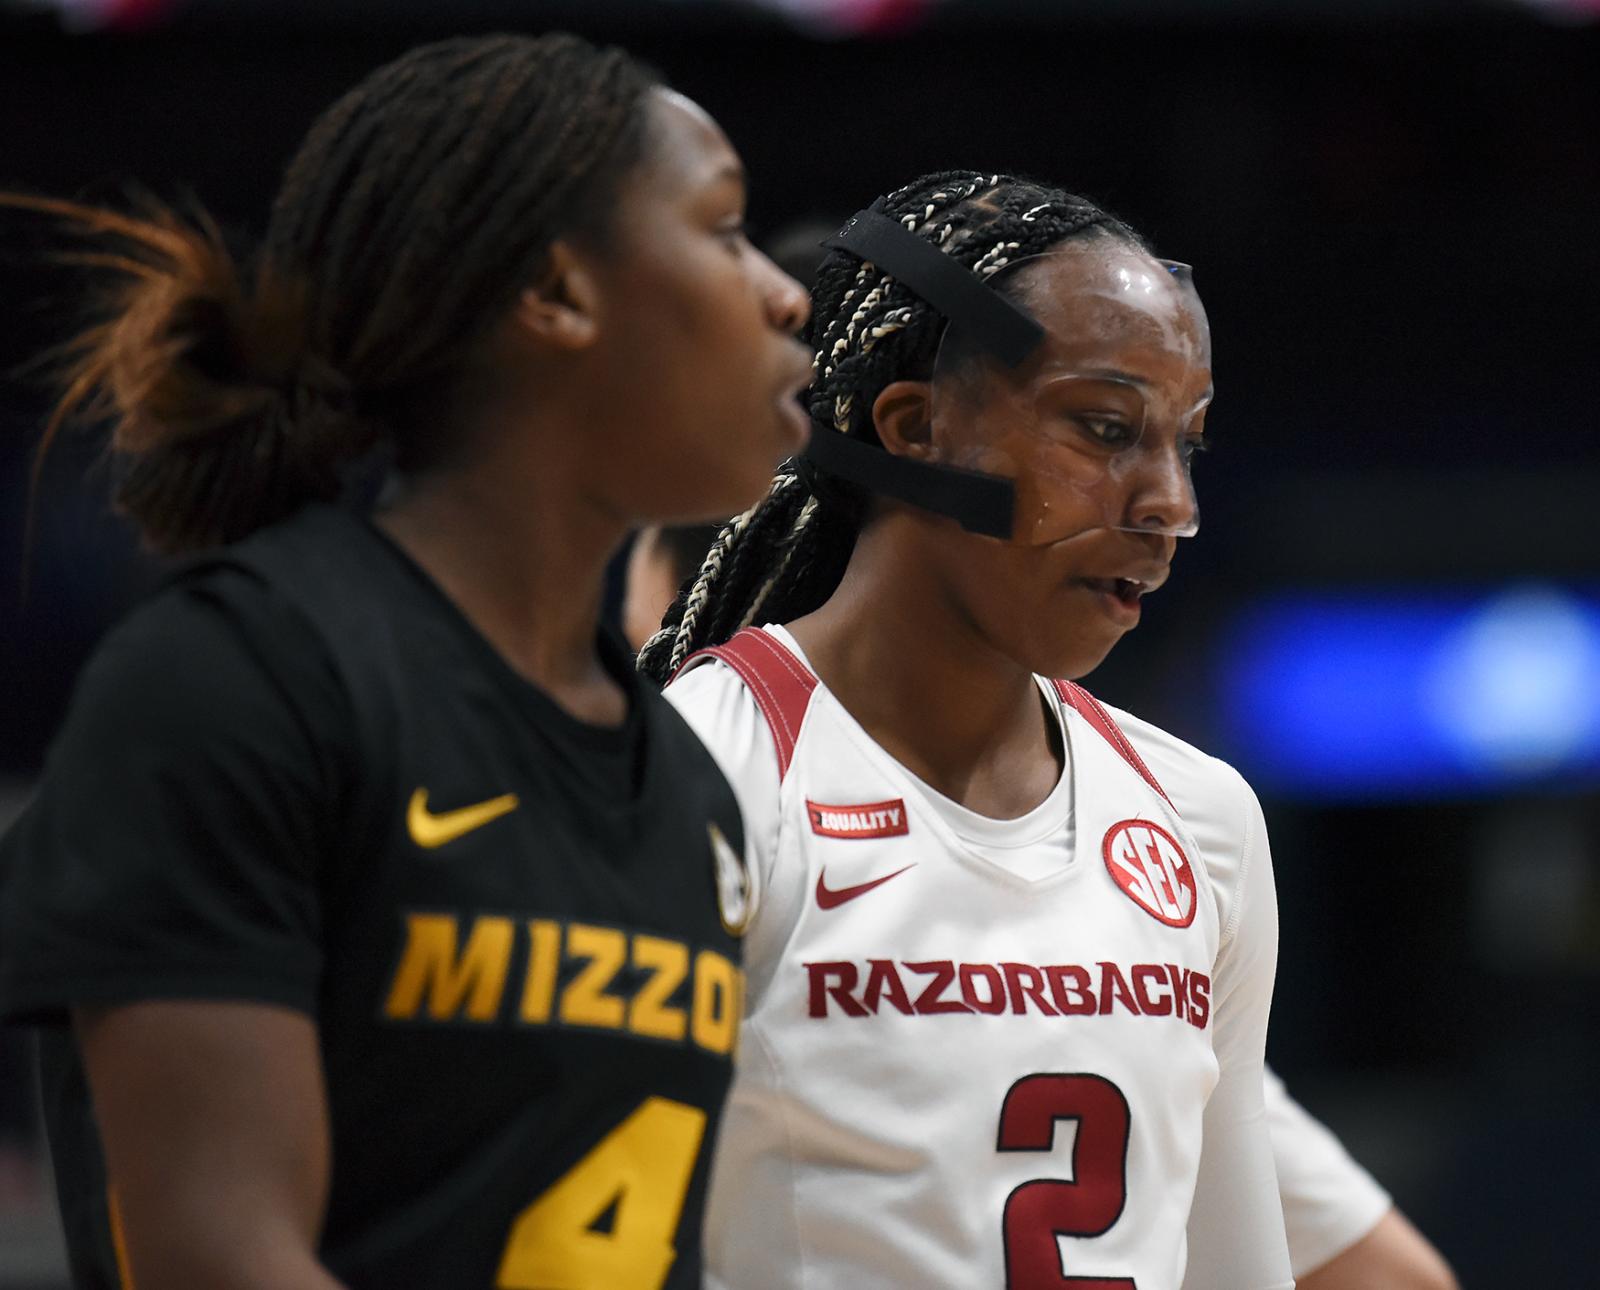 Samara Spencer, right, looks down at the court on Thursday, March 3, 2022 at Bridgestone Arena in Nashville. With the win against Missouri, Arkansas would then go on to lose to South Carolina in their following game.